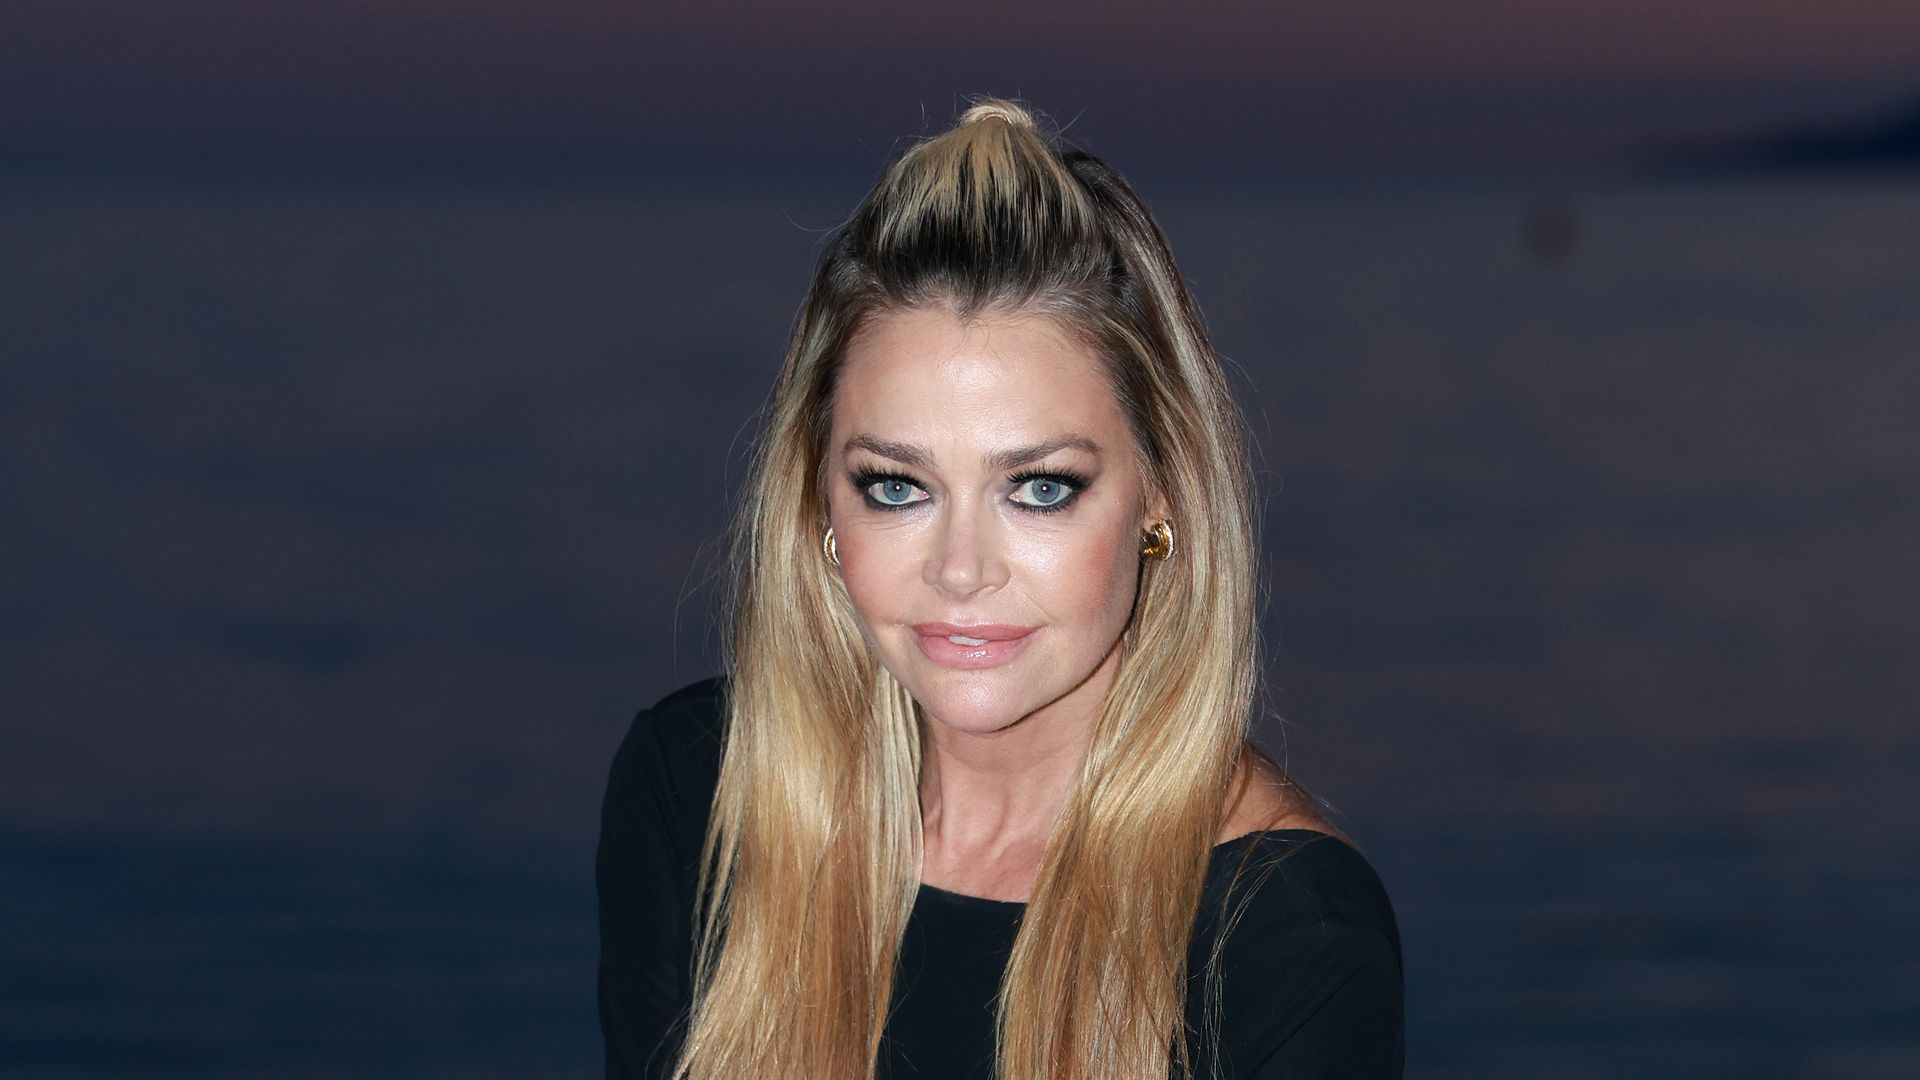 Denise Richards attends the "Paper Empire" Tv Show Event at Annex Beach in Cannes